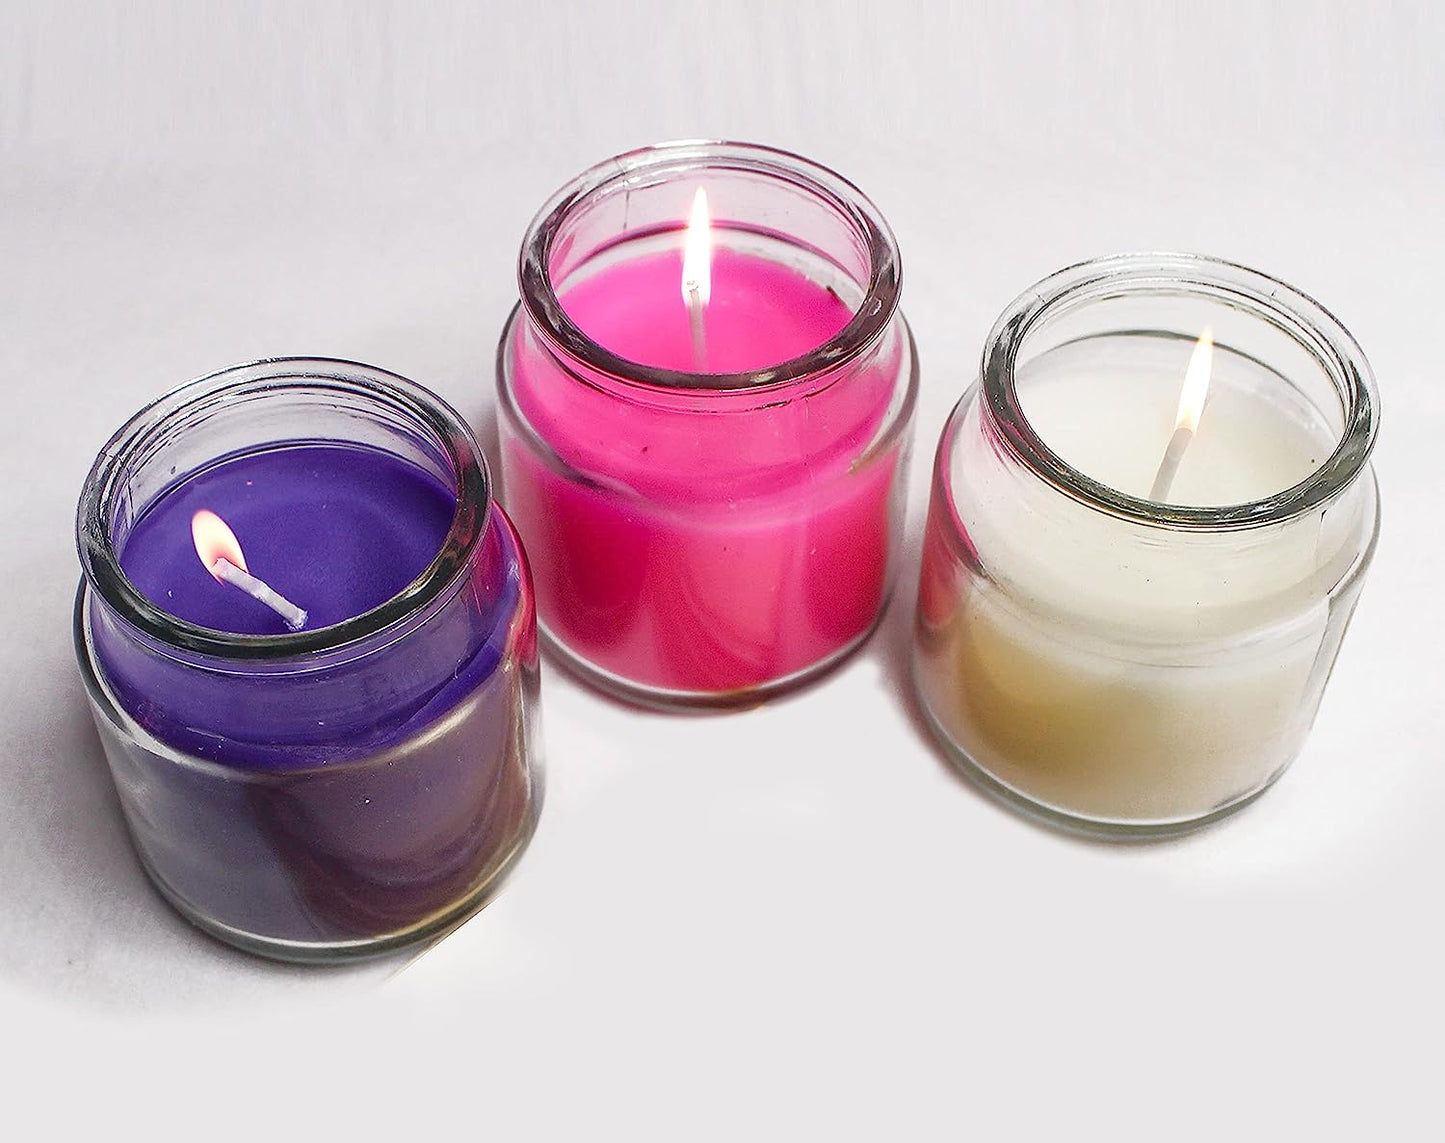 Paraffin Indian Scented Wax Jar Candle Set Pack of 3 (Lavender, Vanilla & Rose)